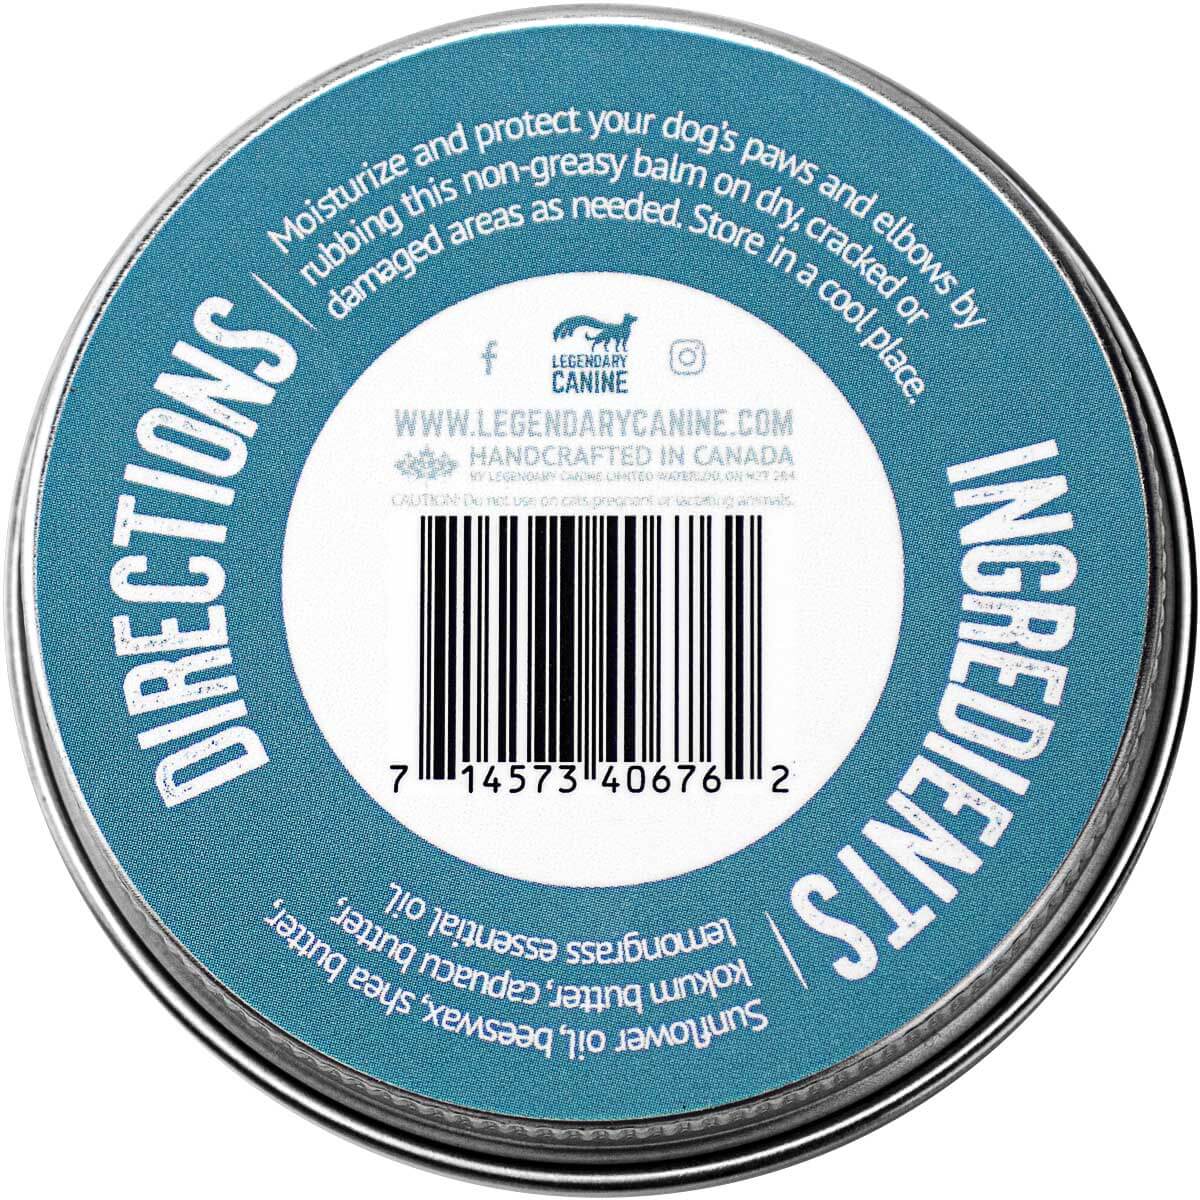 Legendary Canine - 100% Natural Paw & Elbow Rescue Balm (For Dogs)